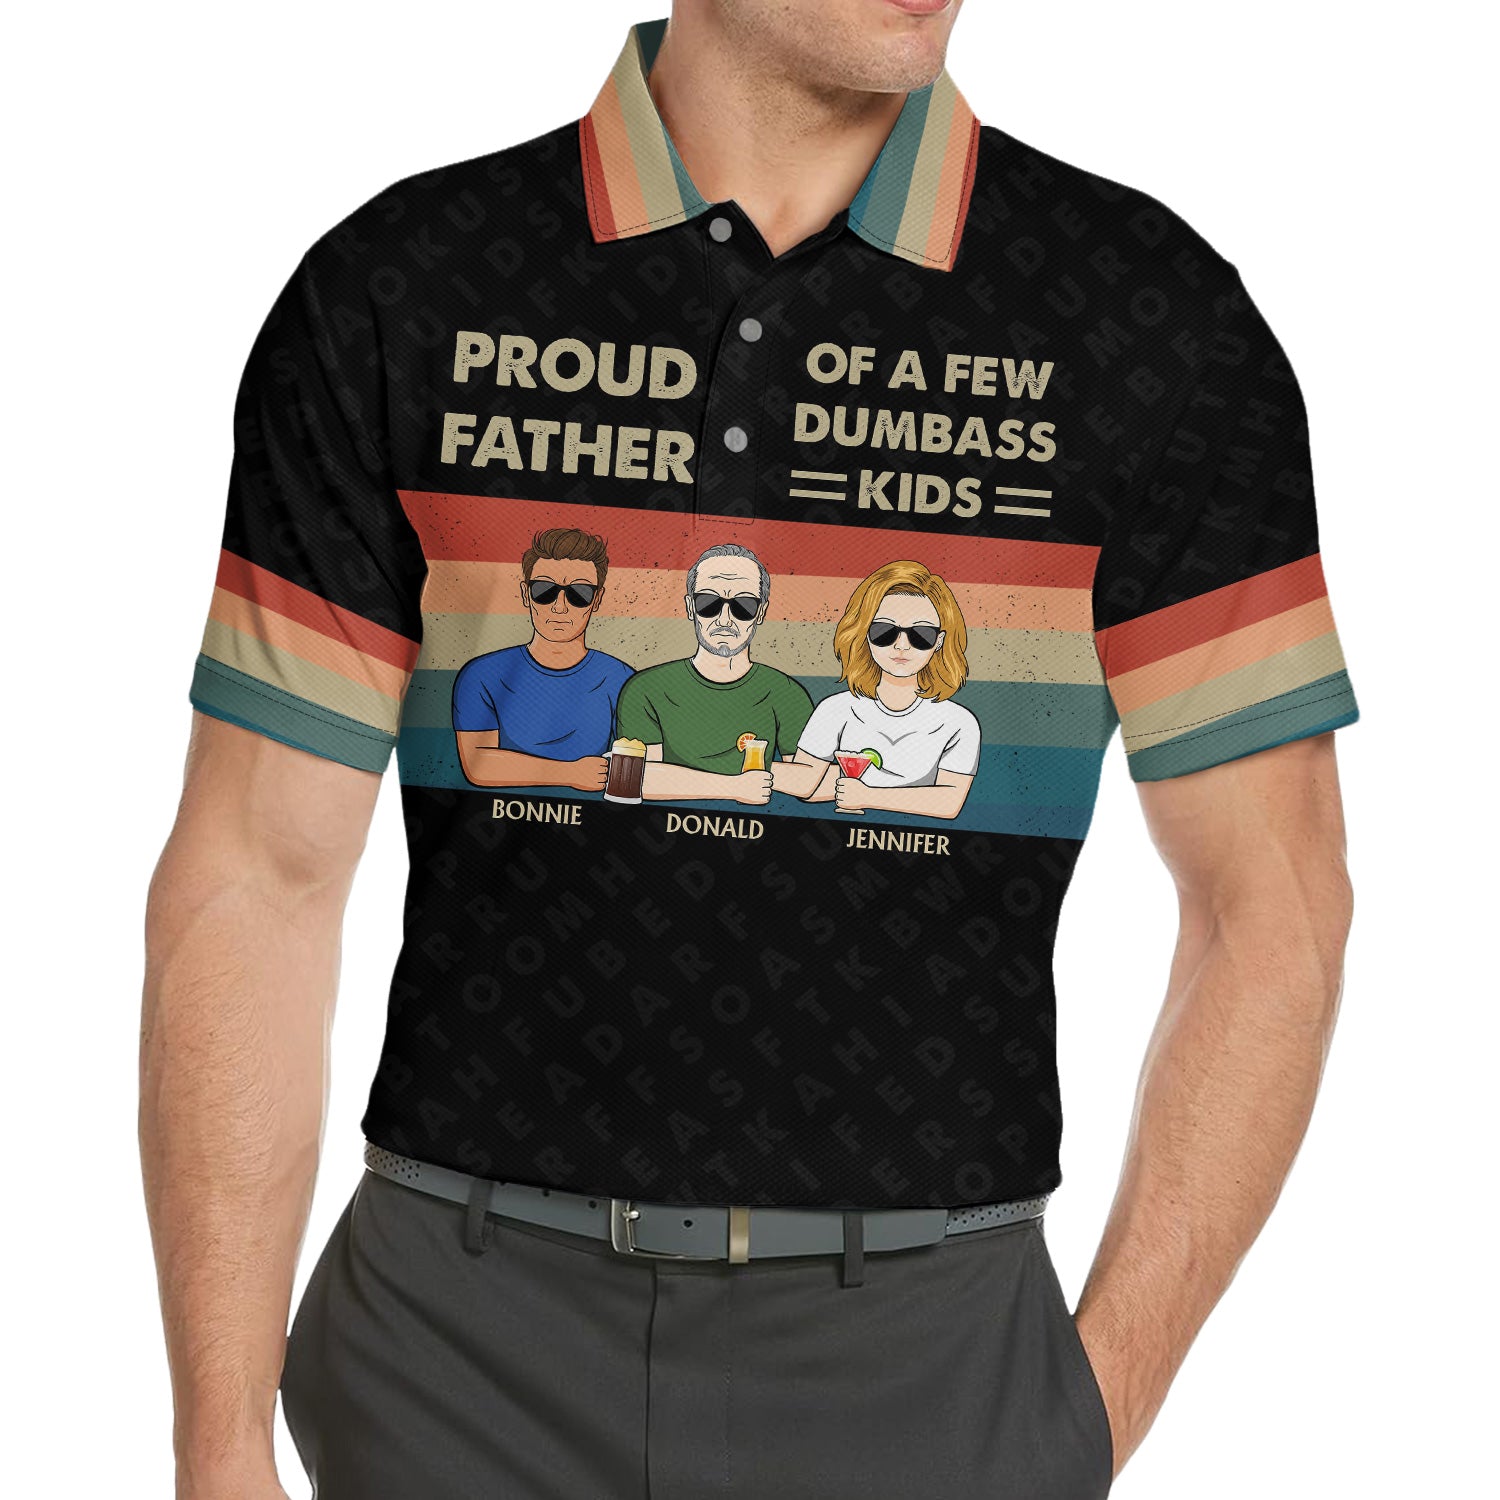 Proud Father Of A Few - Funny Gift For Dad, Daddy, Grandpa - Personalized Polo Shirt